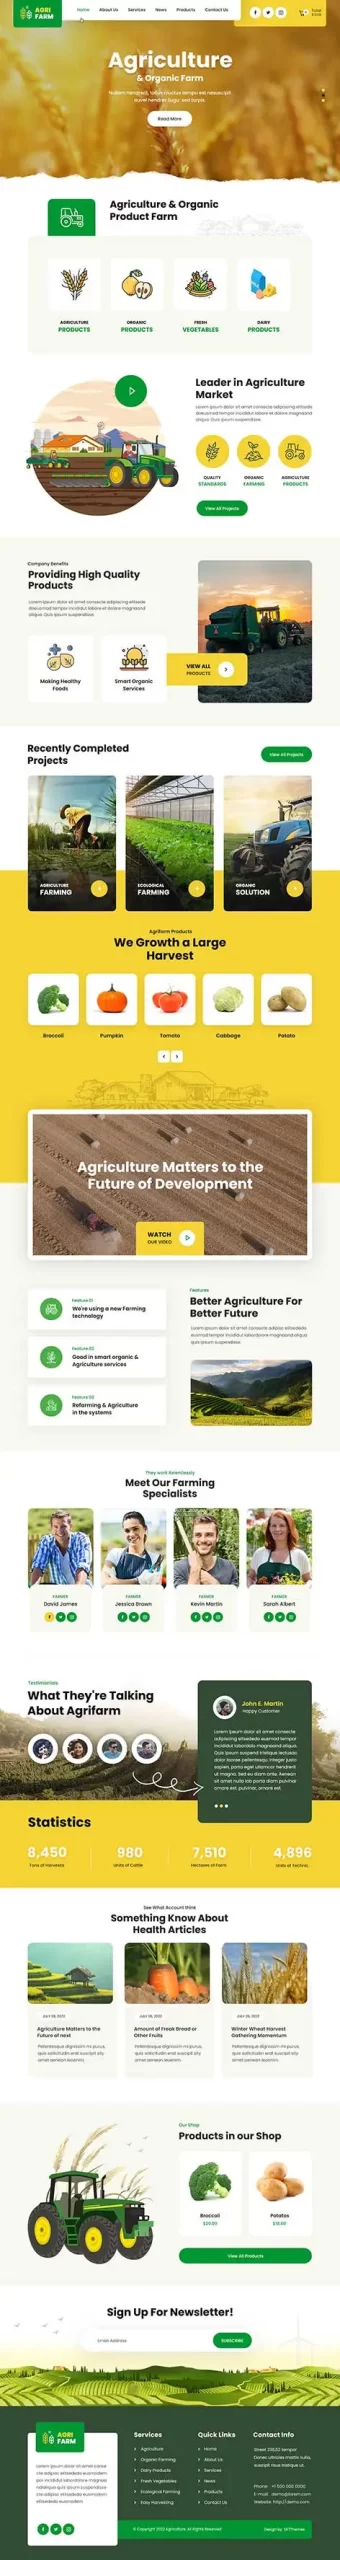 agriculture WordPress theme